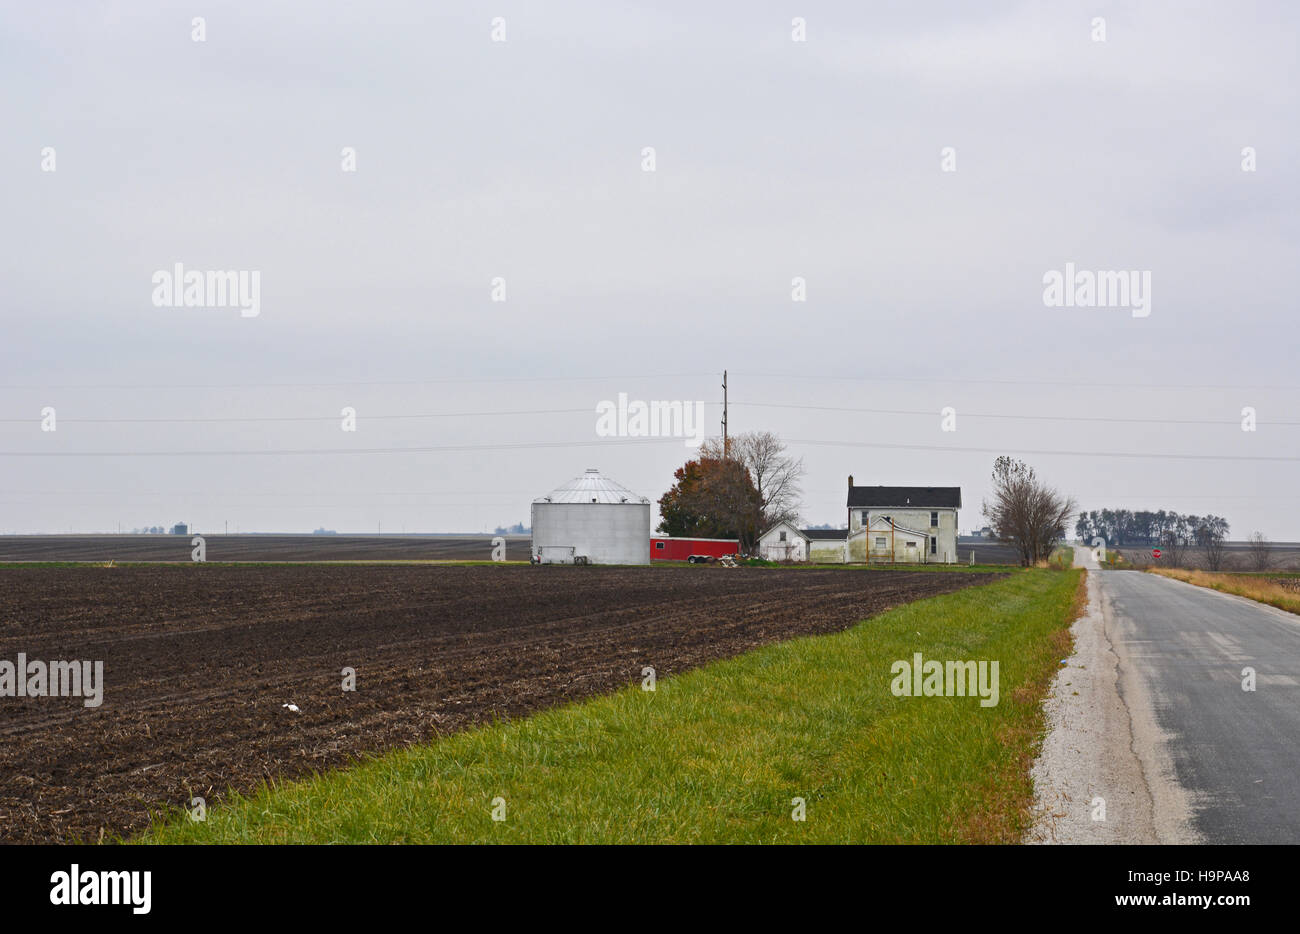 A Central Illinois farmhouse under cold gray November skies in the Midwestern United States. Stock Photo